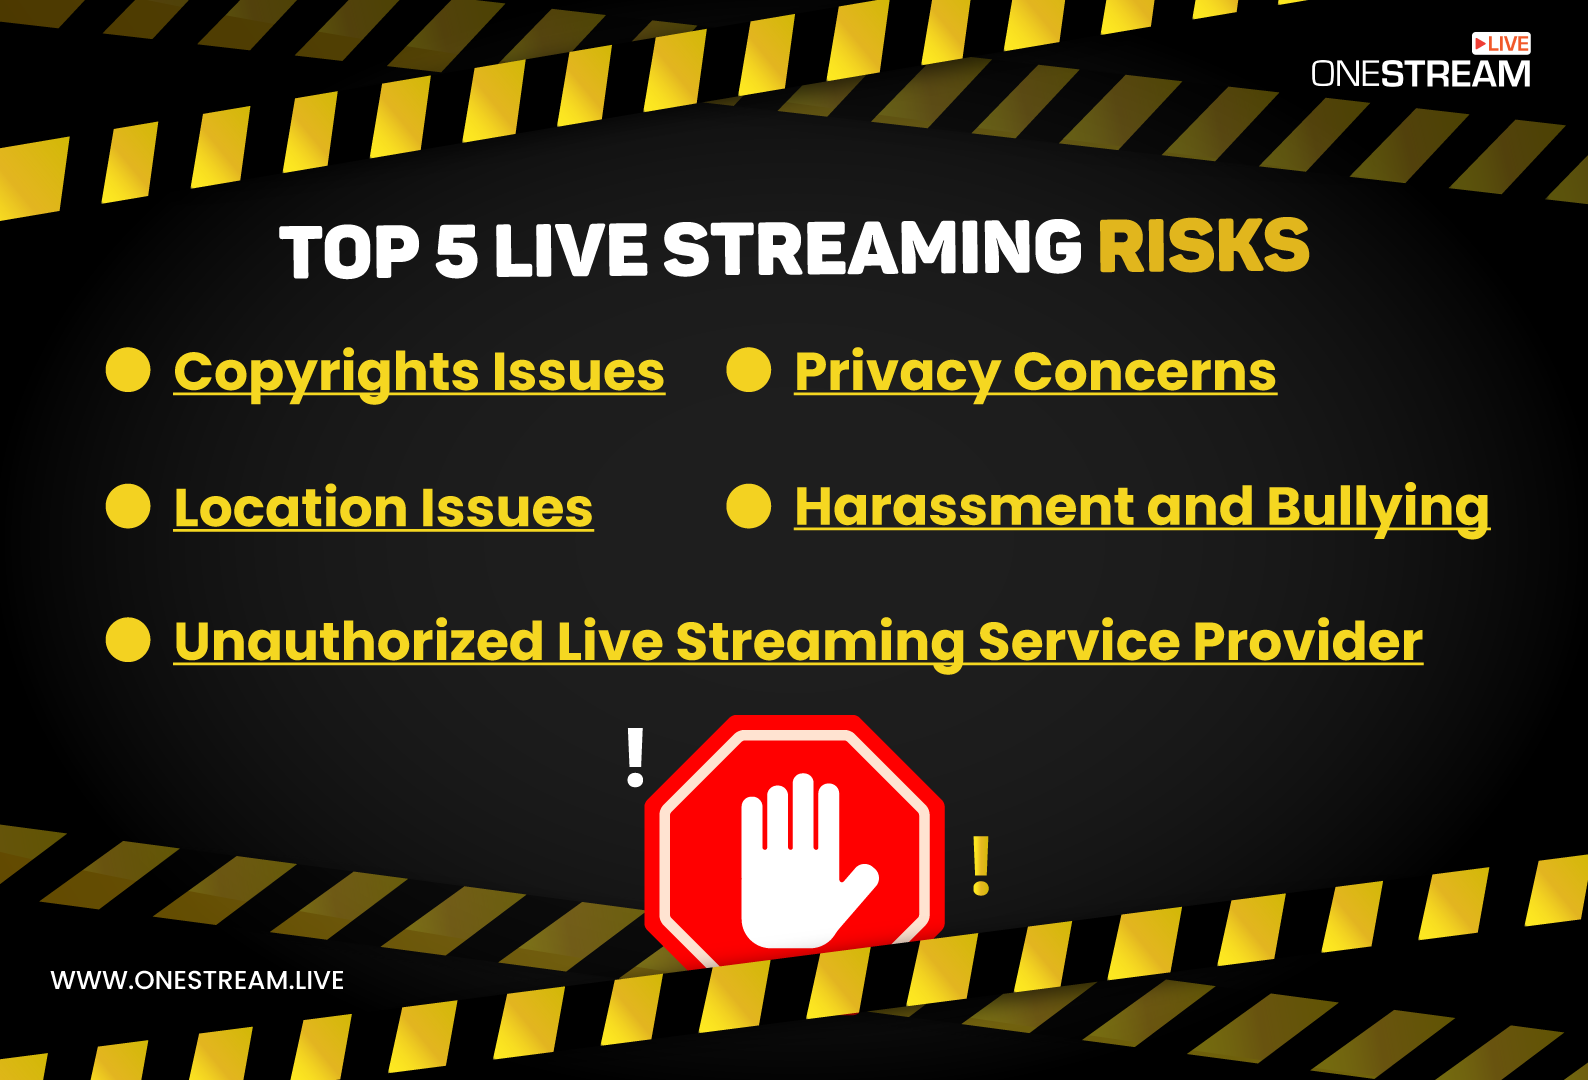 Risks of live streaming